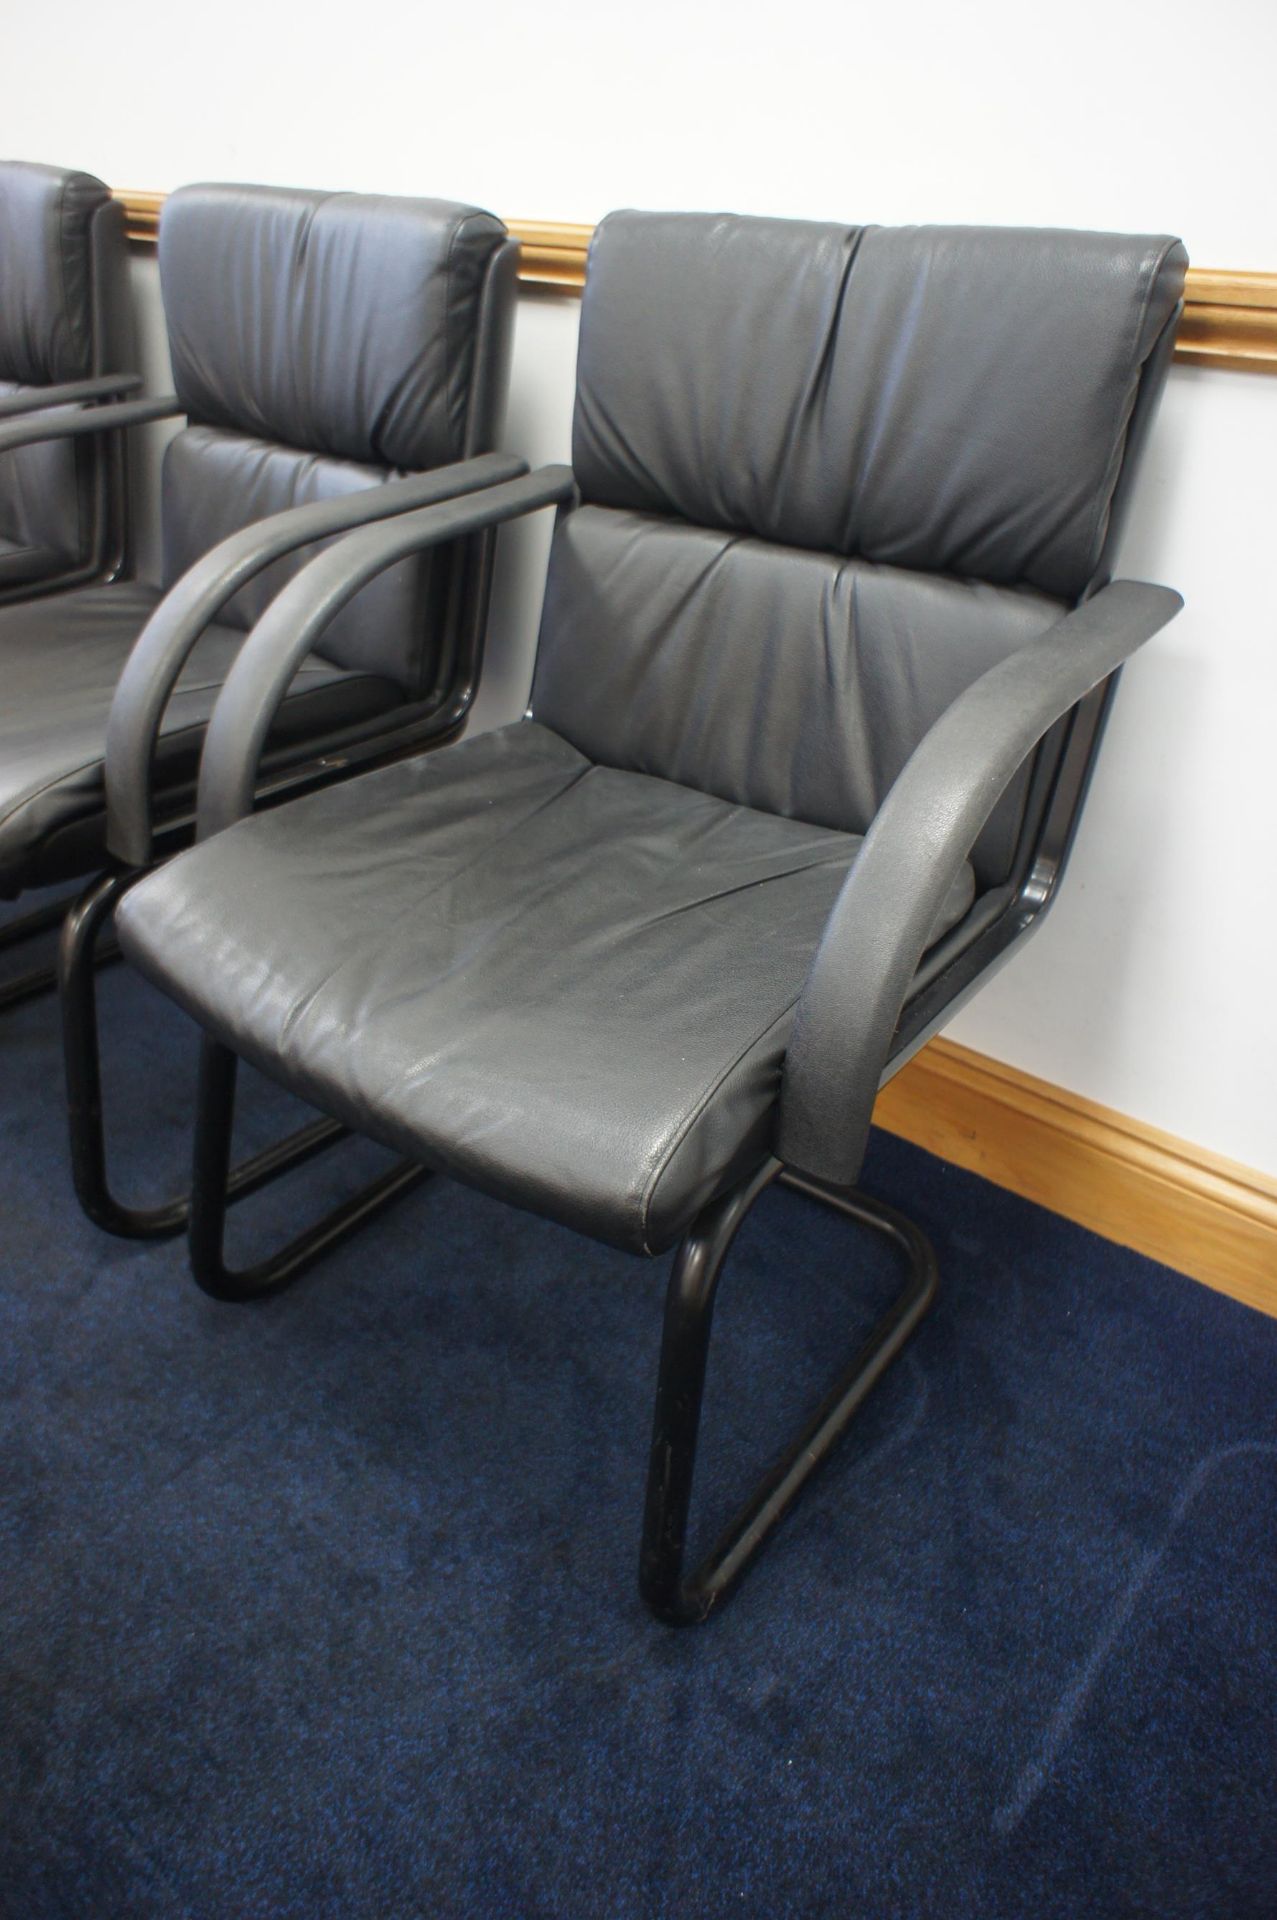 3 x Leather Effect Steel Framed Meeting Chairs - Image 3 of 3